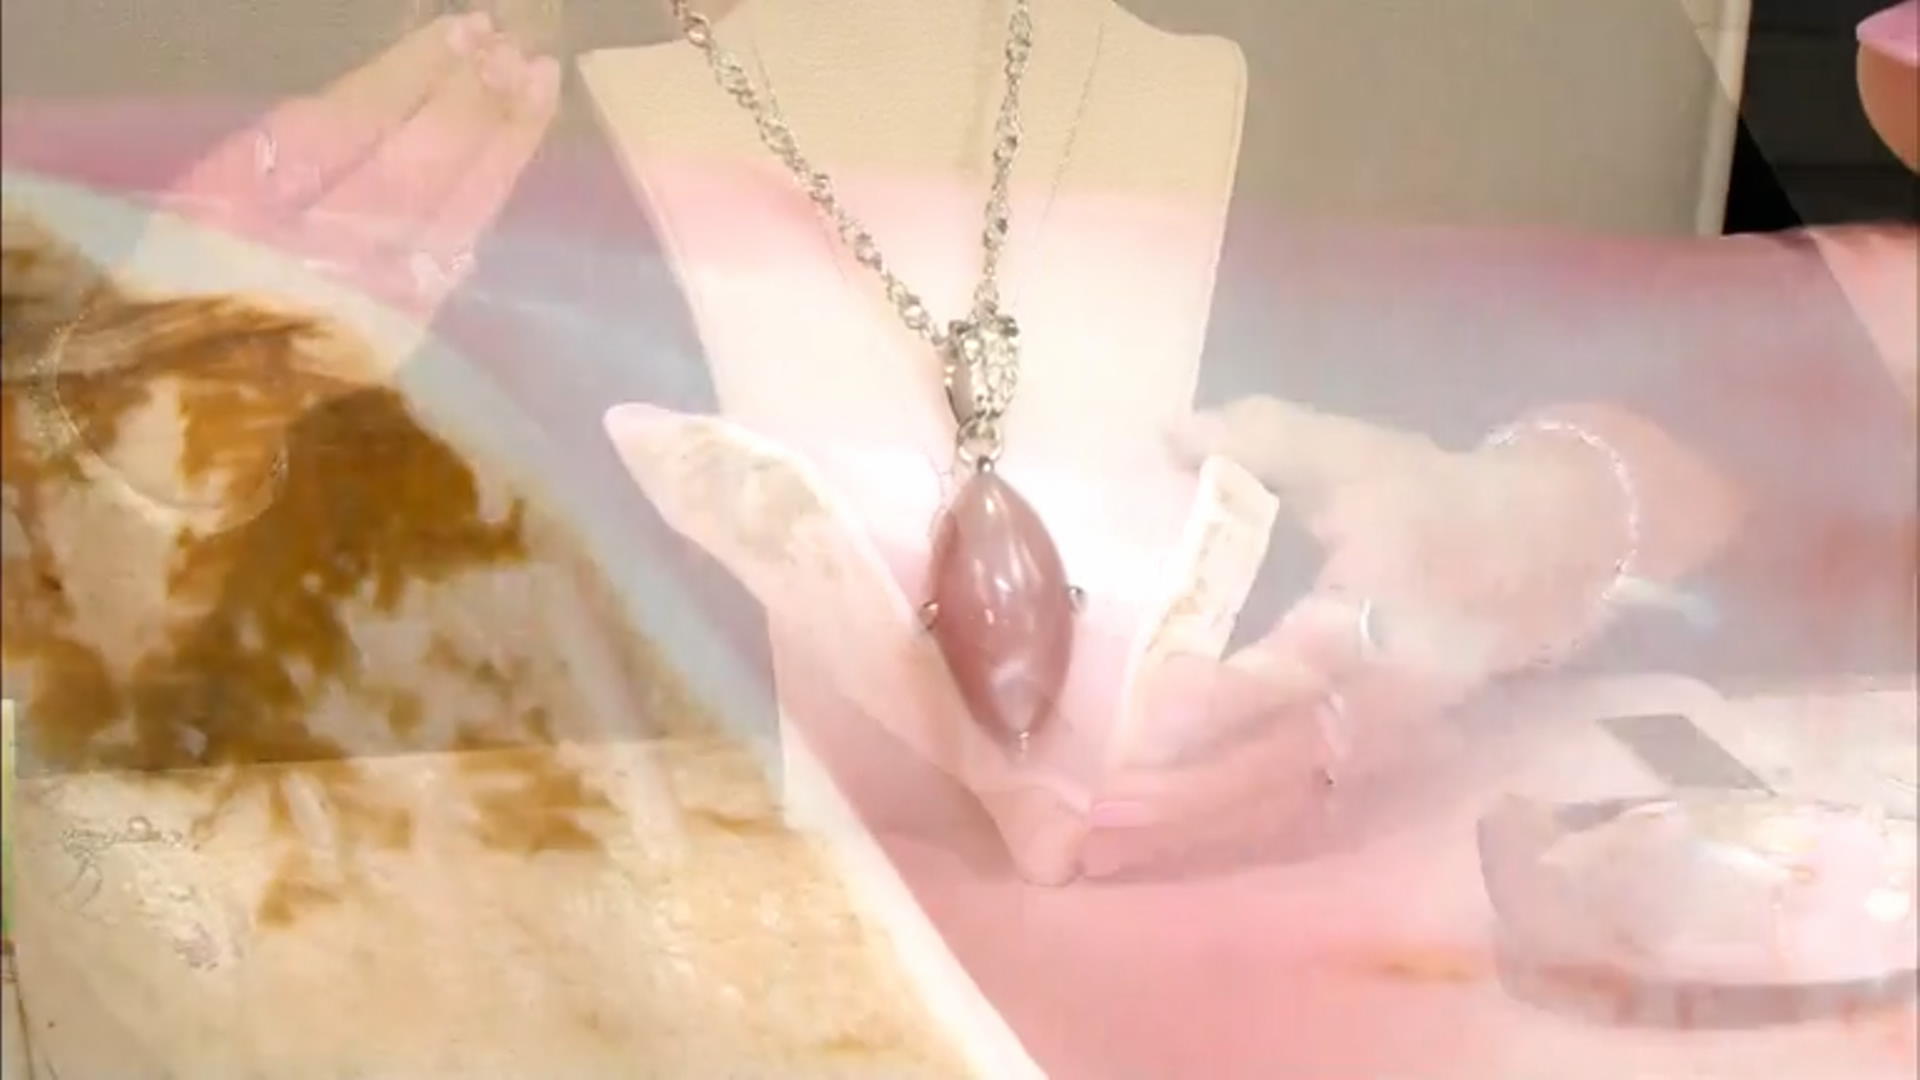 Pink Mother-Of-Pearl Rhodium Over Sterling Silver Pendant With Chain 0.09ctw Video Thumbnail